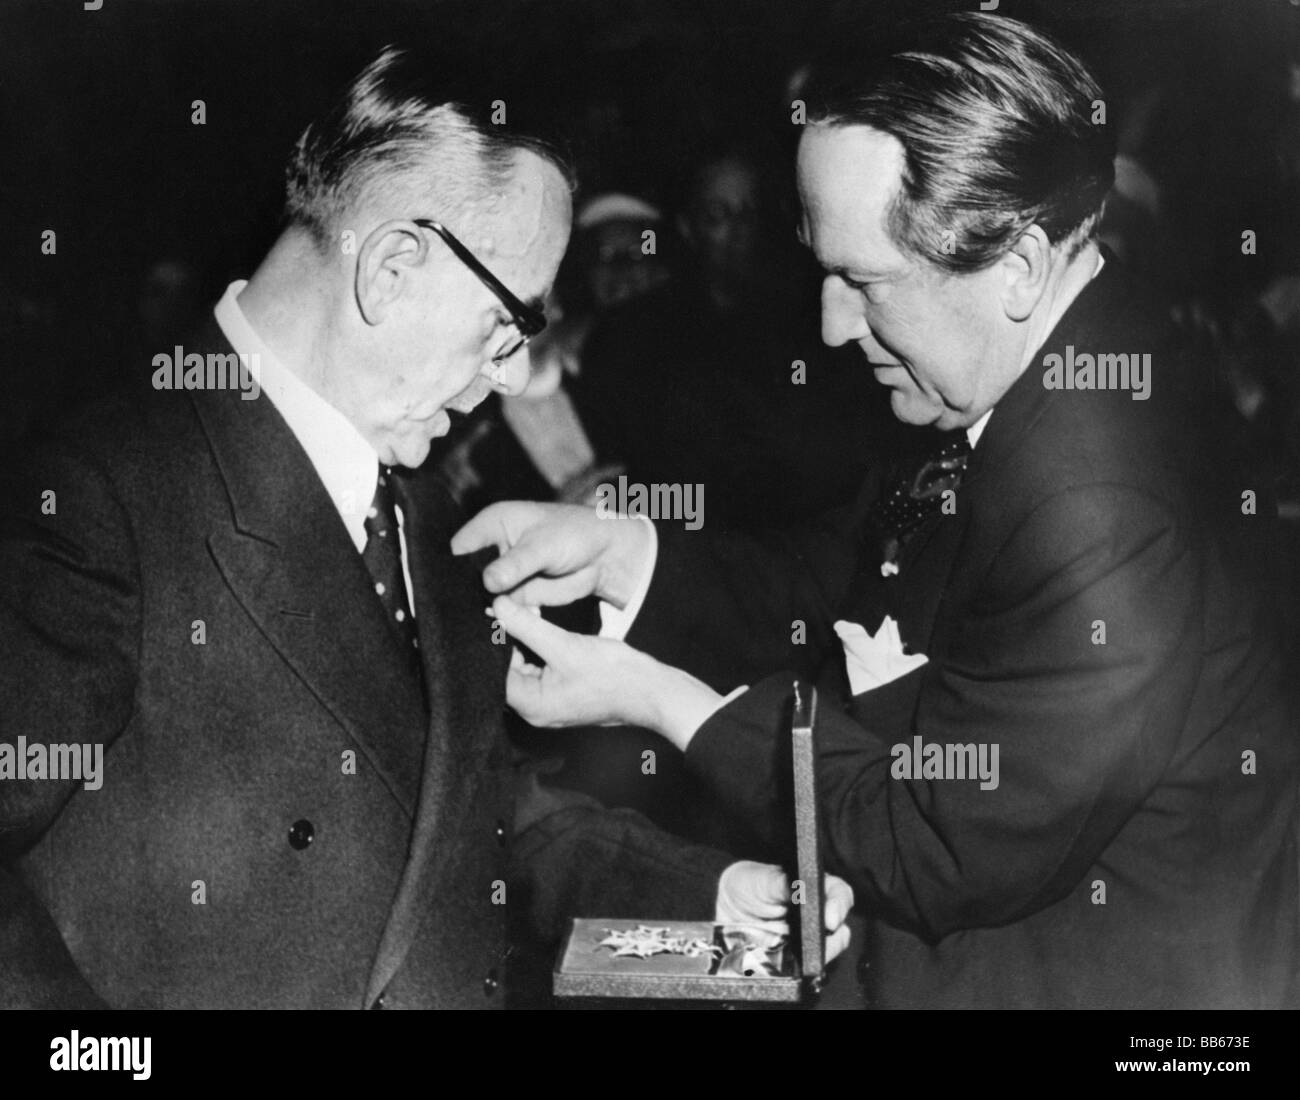 Mann, Thomas, 6.6.1875 - 12.8.1955, German author / writer, Nobel Prize for literature 1929, with Dutch foreign minister Johan Willem Beyen, awarding of the cross of the commander of Oranien - Nassau, , Stock Photo